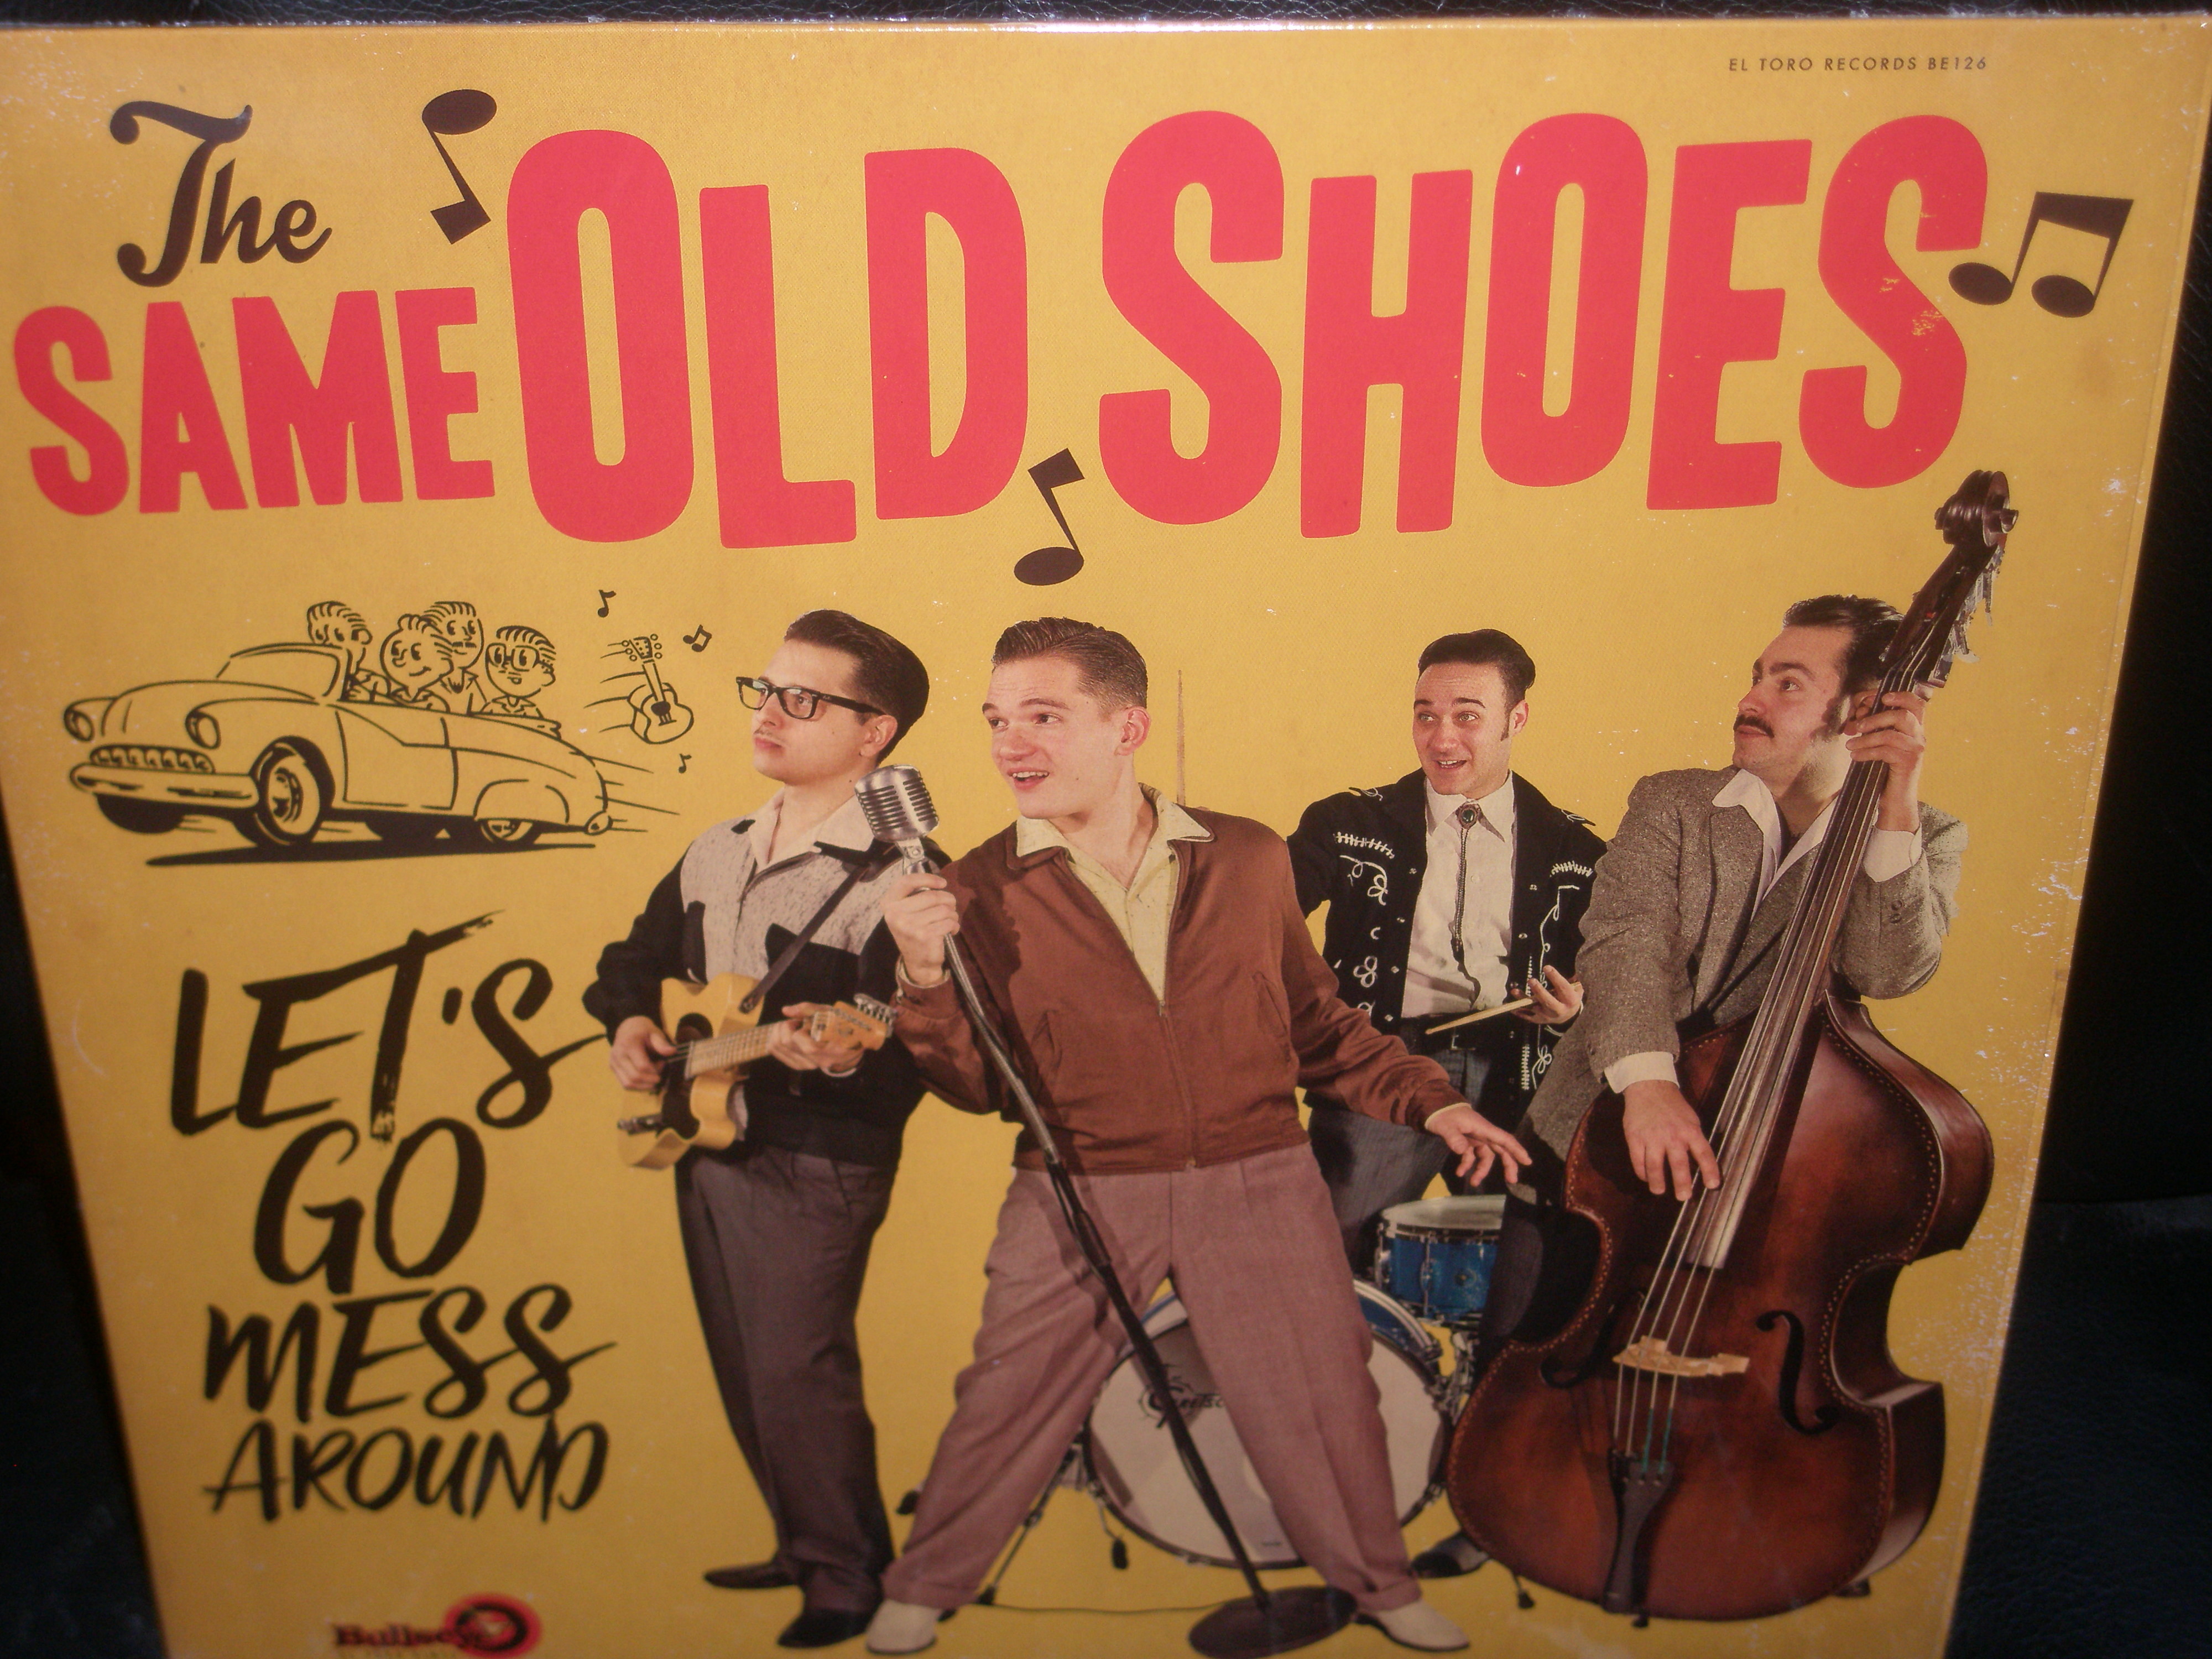 The Same Old Shoes; Let's Go Mess Around; LP – Tessy Records